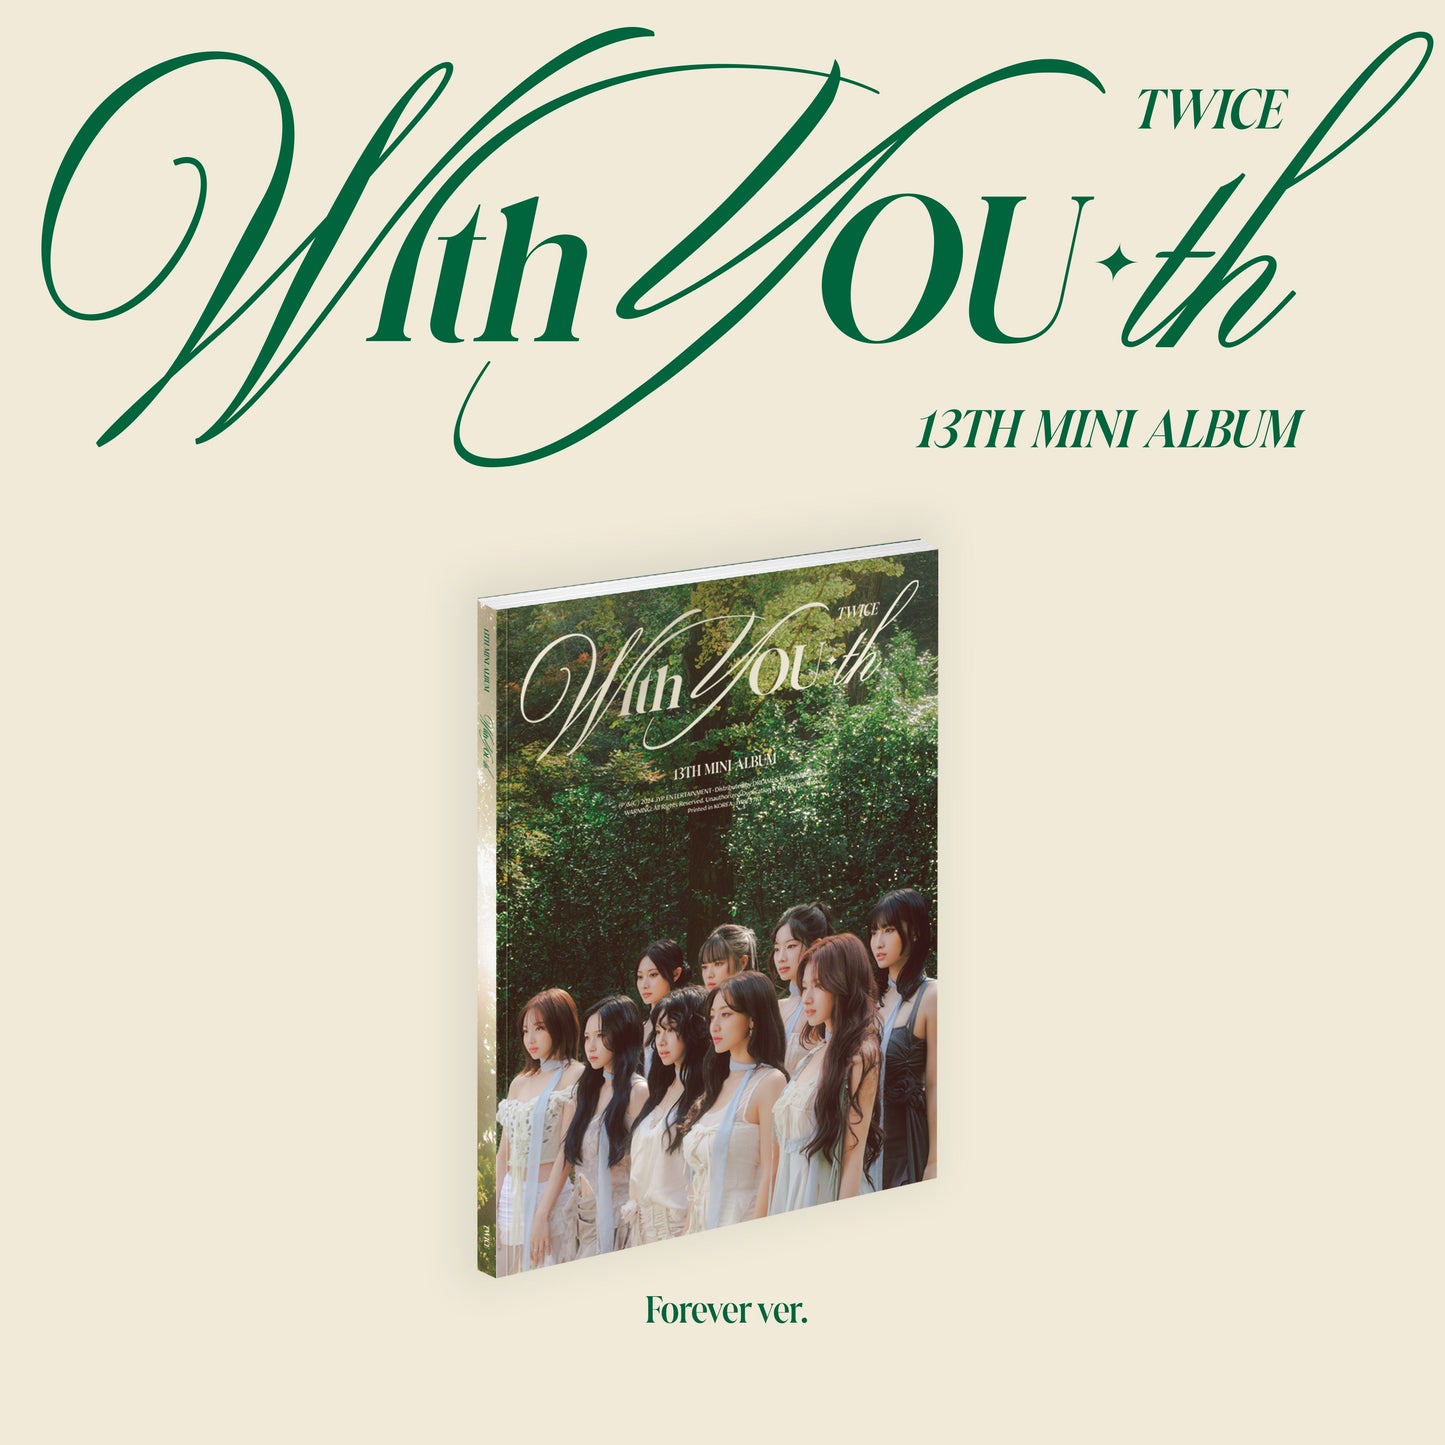 TWICE 13TH MINI ALBUM 'WITH YOU-TH' FOREVER VERSION COVER